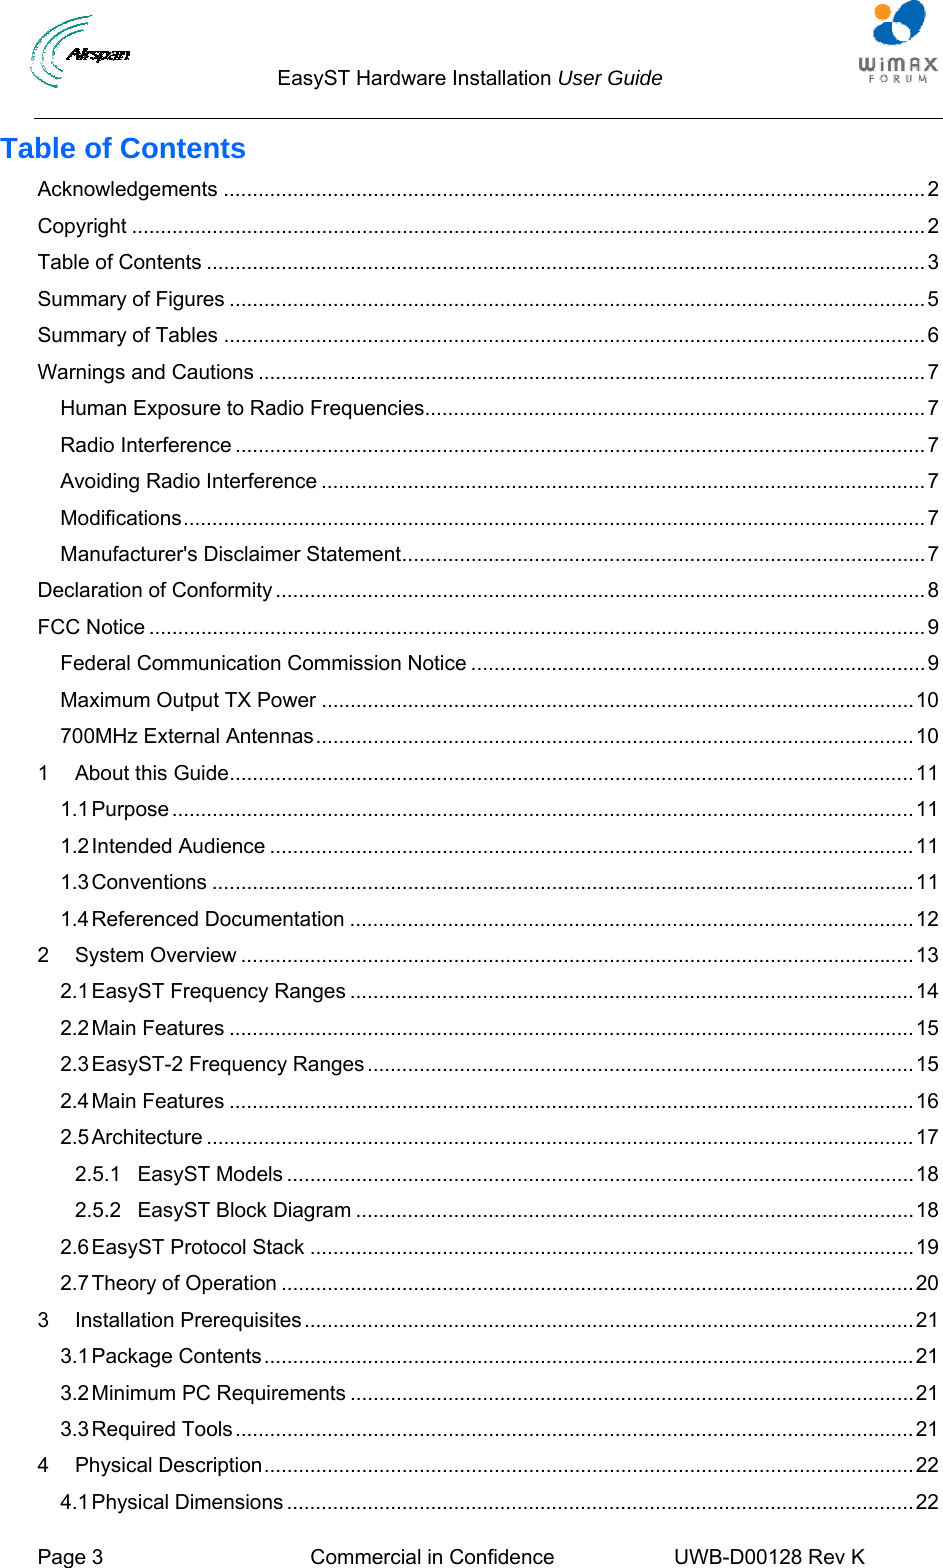                                  EasyST Hardware Installation User Guide     Page 3  Commercial in Confidence  UWB-D00128 Rev K   Table of Contents Acknowledgements ..........................................................................................................................2 Copyright ..........................................................................................................................................2 Table of Contents .............................................................................................................................3 Summary of Figures .........................................................................................................................5 Summary of Tables ..........................................................................................................................6 Warnings and Cautions ....................................................................................................................7 Human Exposure to Radio Frequencies.......................................................................................7 Radio Interference ........................................................................................................................7 Avoiding Radio Interference .........................................................................................................7 Modifications.................................................................................................................................7 Manufacturer&apos;s Disclaimer Statement...........................................................................................7 Declaration of Conformity .................................................................................................................8 FCC Notice .......................................................................................................................................9 Federal Communication Commission Notice ...............................................................................9 Maximum Output TX Power .......................................................................................................10 700MHz External Antennas........................................................................................................10 1 About this Guide.......................................................................................................................11 1.1 Purpose .................................................................................................................................11 1.2 Intended Audience ................................................................................................................11 1.3 Conventions ..........................................................................................................................11 1.4 Referenced Documentation ..................................................................................................12 2 System Overview .....................................................................................................................13 2.1 EasyST Frequency Ranges ..................................................................................................14 2.2 Main Features .......................................................................................................................15 2.3 EasyST-2 Frequency Ranges...............................................................................................15 2.4 Main Features .......................................................................................................................16 2.5 Architecture ...........................................................................................................................17 2.5.1 EasyST Models .............................................................................................................18 2.5.2 EasyST Block Diagram .................................................................................................18 2.6 EasyST Protocol Stack .........................................................................................................19 2.7 Theory of Operation ..............................................................................................................20 3 Installation Prerequisites..........................................................................................................21 3.1 Package Contents.................................................................................................................21 3.2 Minimum PC Requirements ..................................................................................................21 3.3 Required Tools......................................................................................................................21 4 Physical Description.................................................................................................................22 4.1 Physical Dimensions .............................................................................................................22 